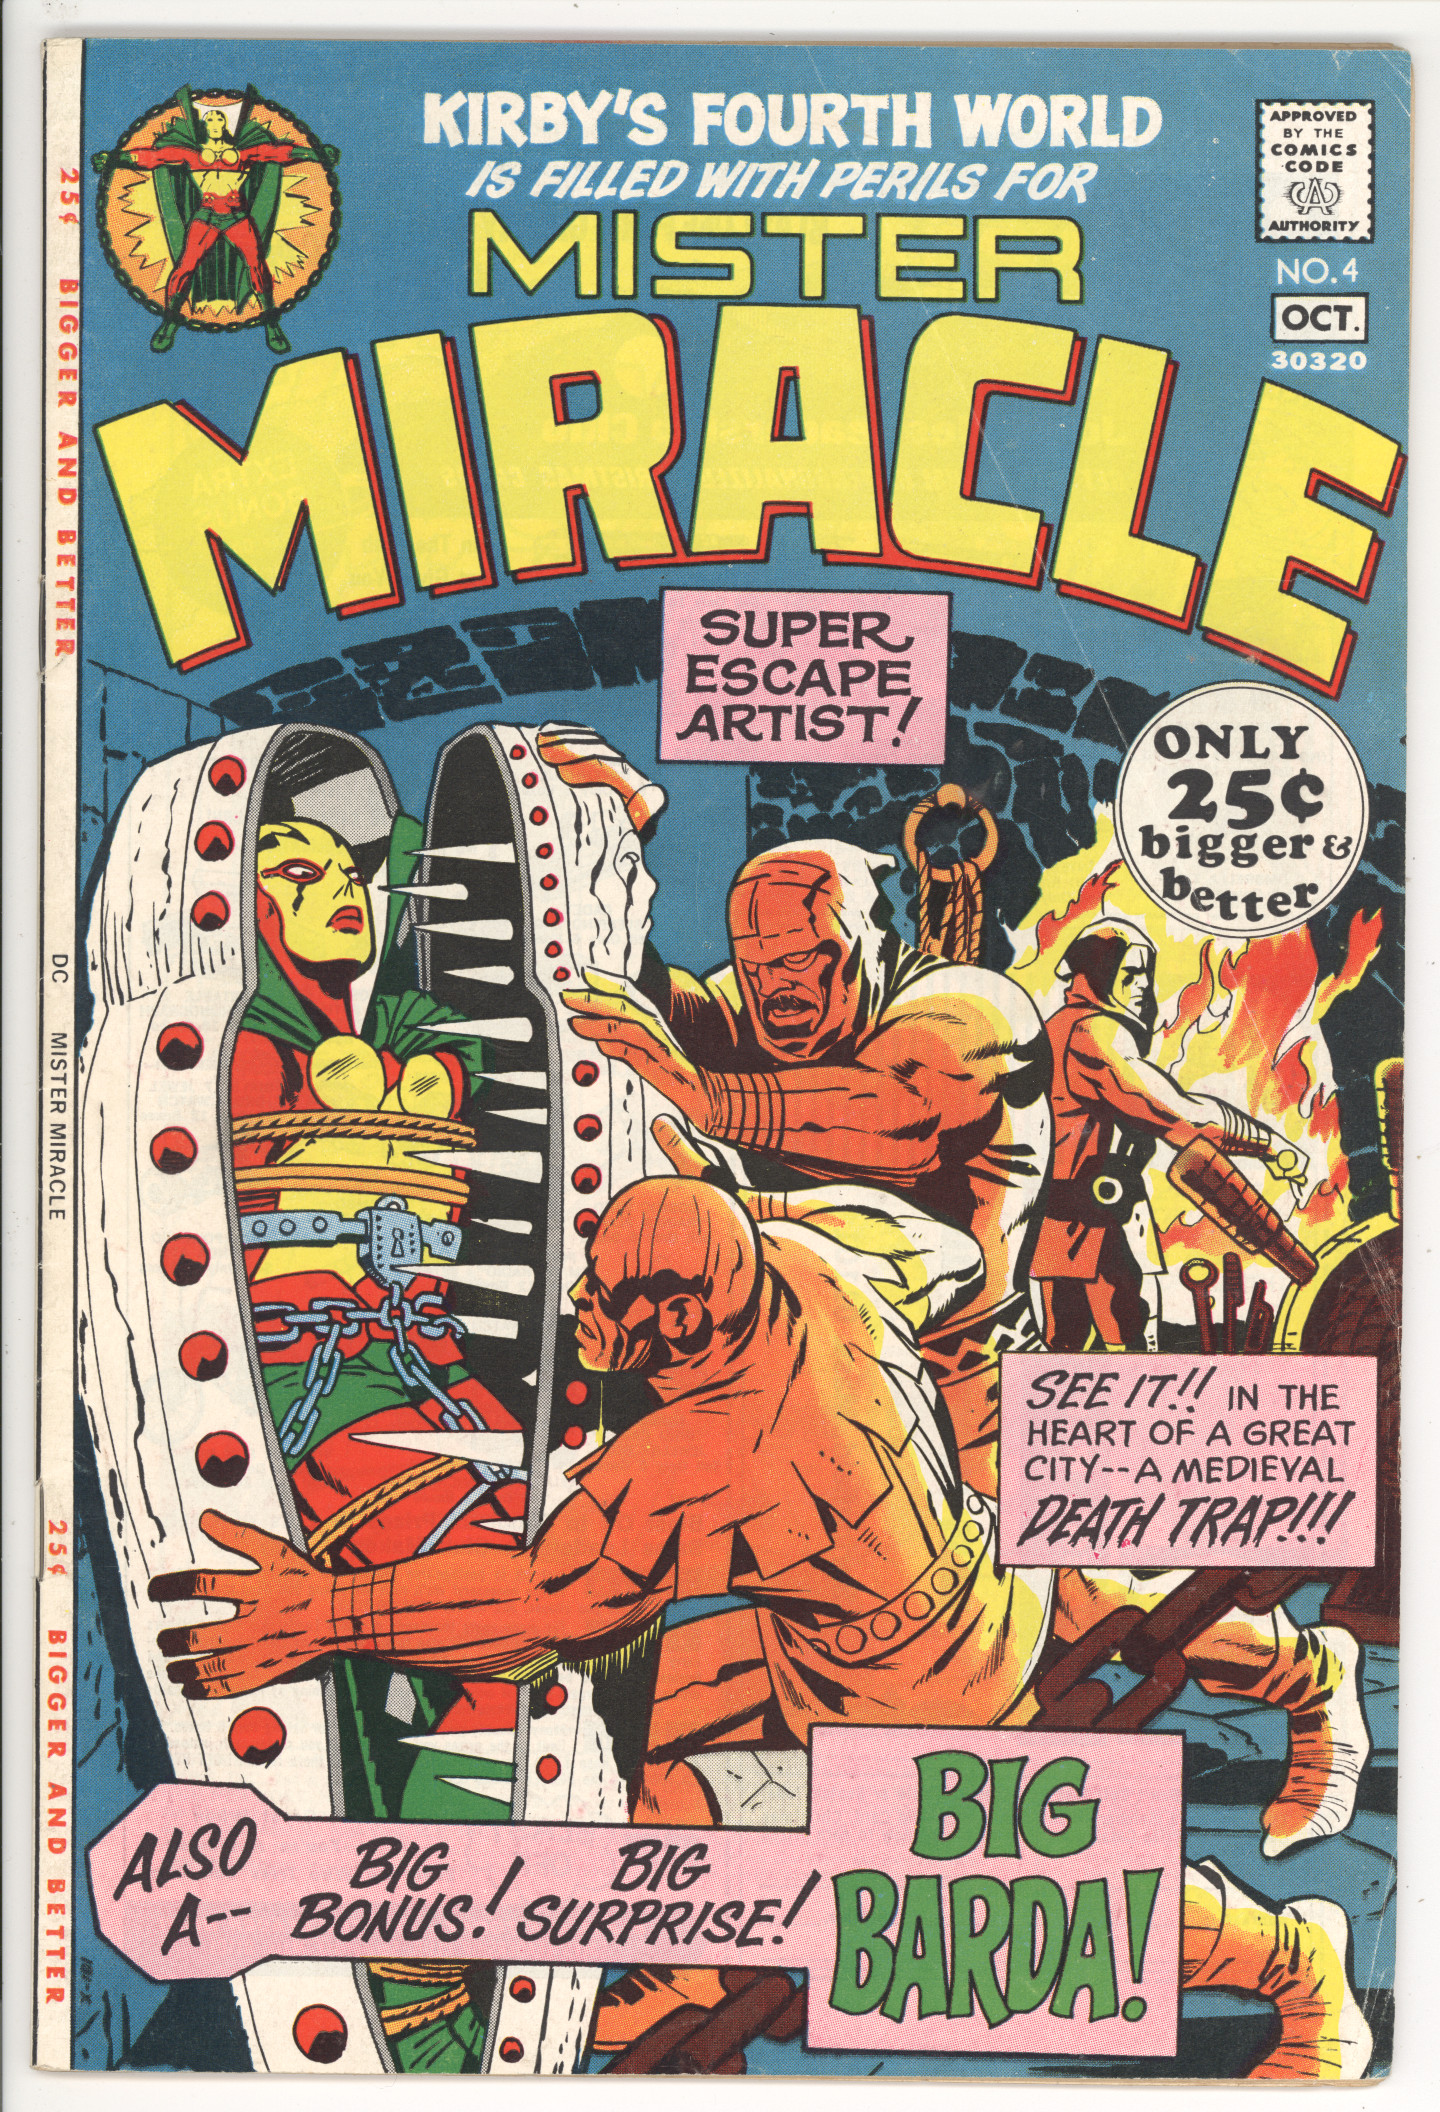 Mister Miracle #4 front